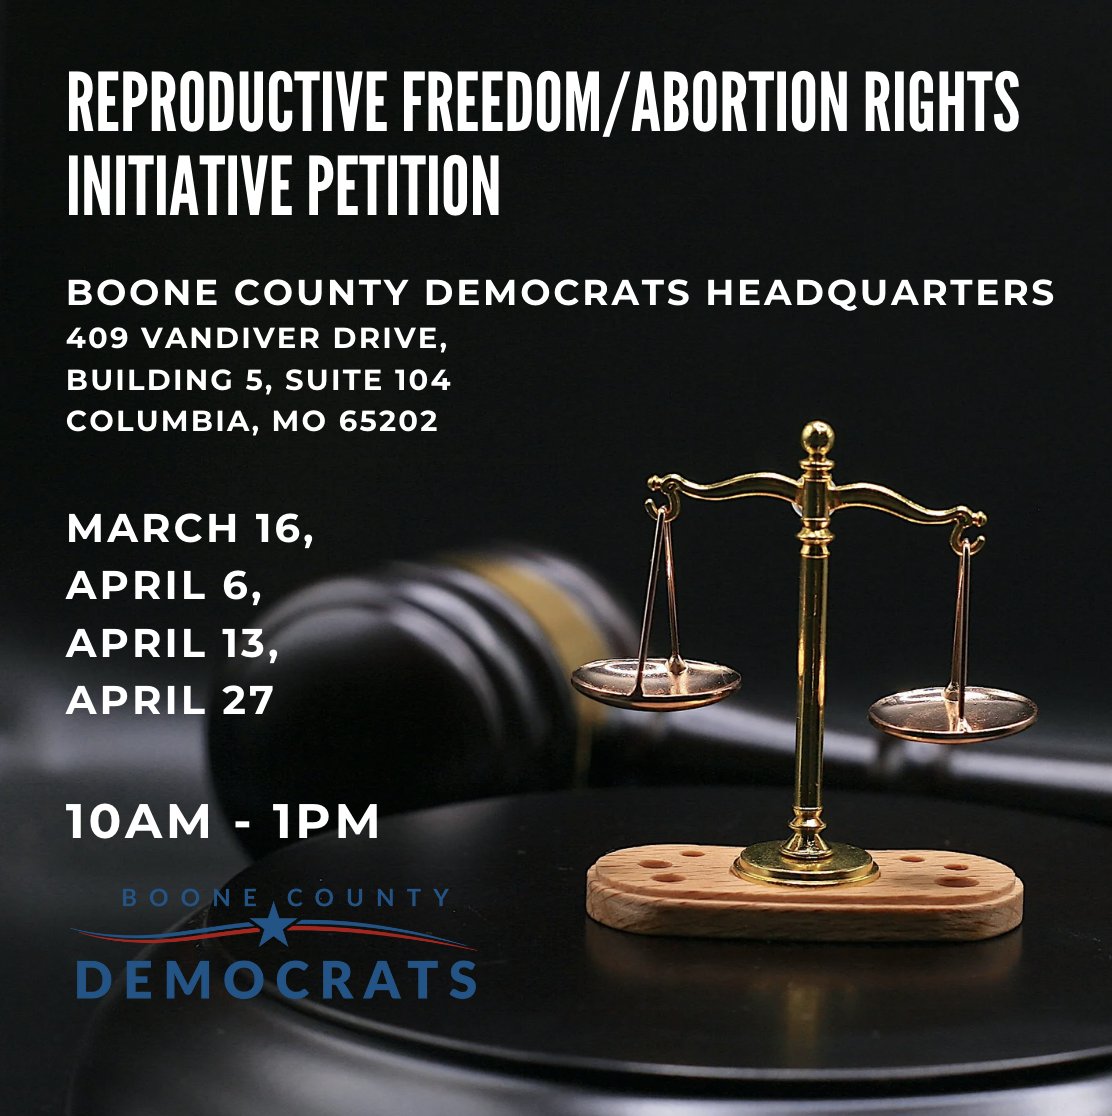 Drive Thru Reproductive Rights Initiative Petition Signing! Saturday 10am - 1pm April 6, April 13, and April 27 at Boone County Democratic Party Headquarters